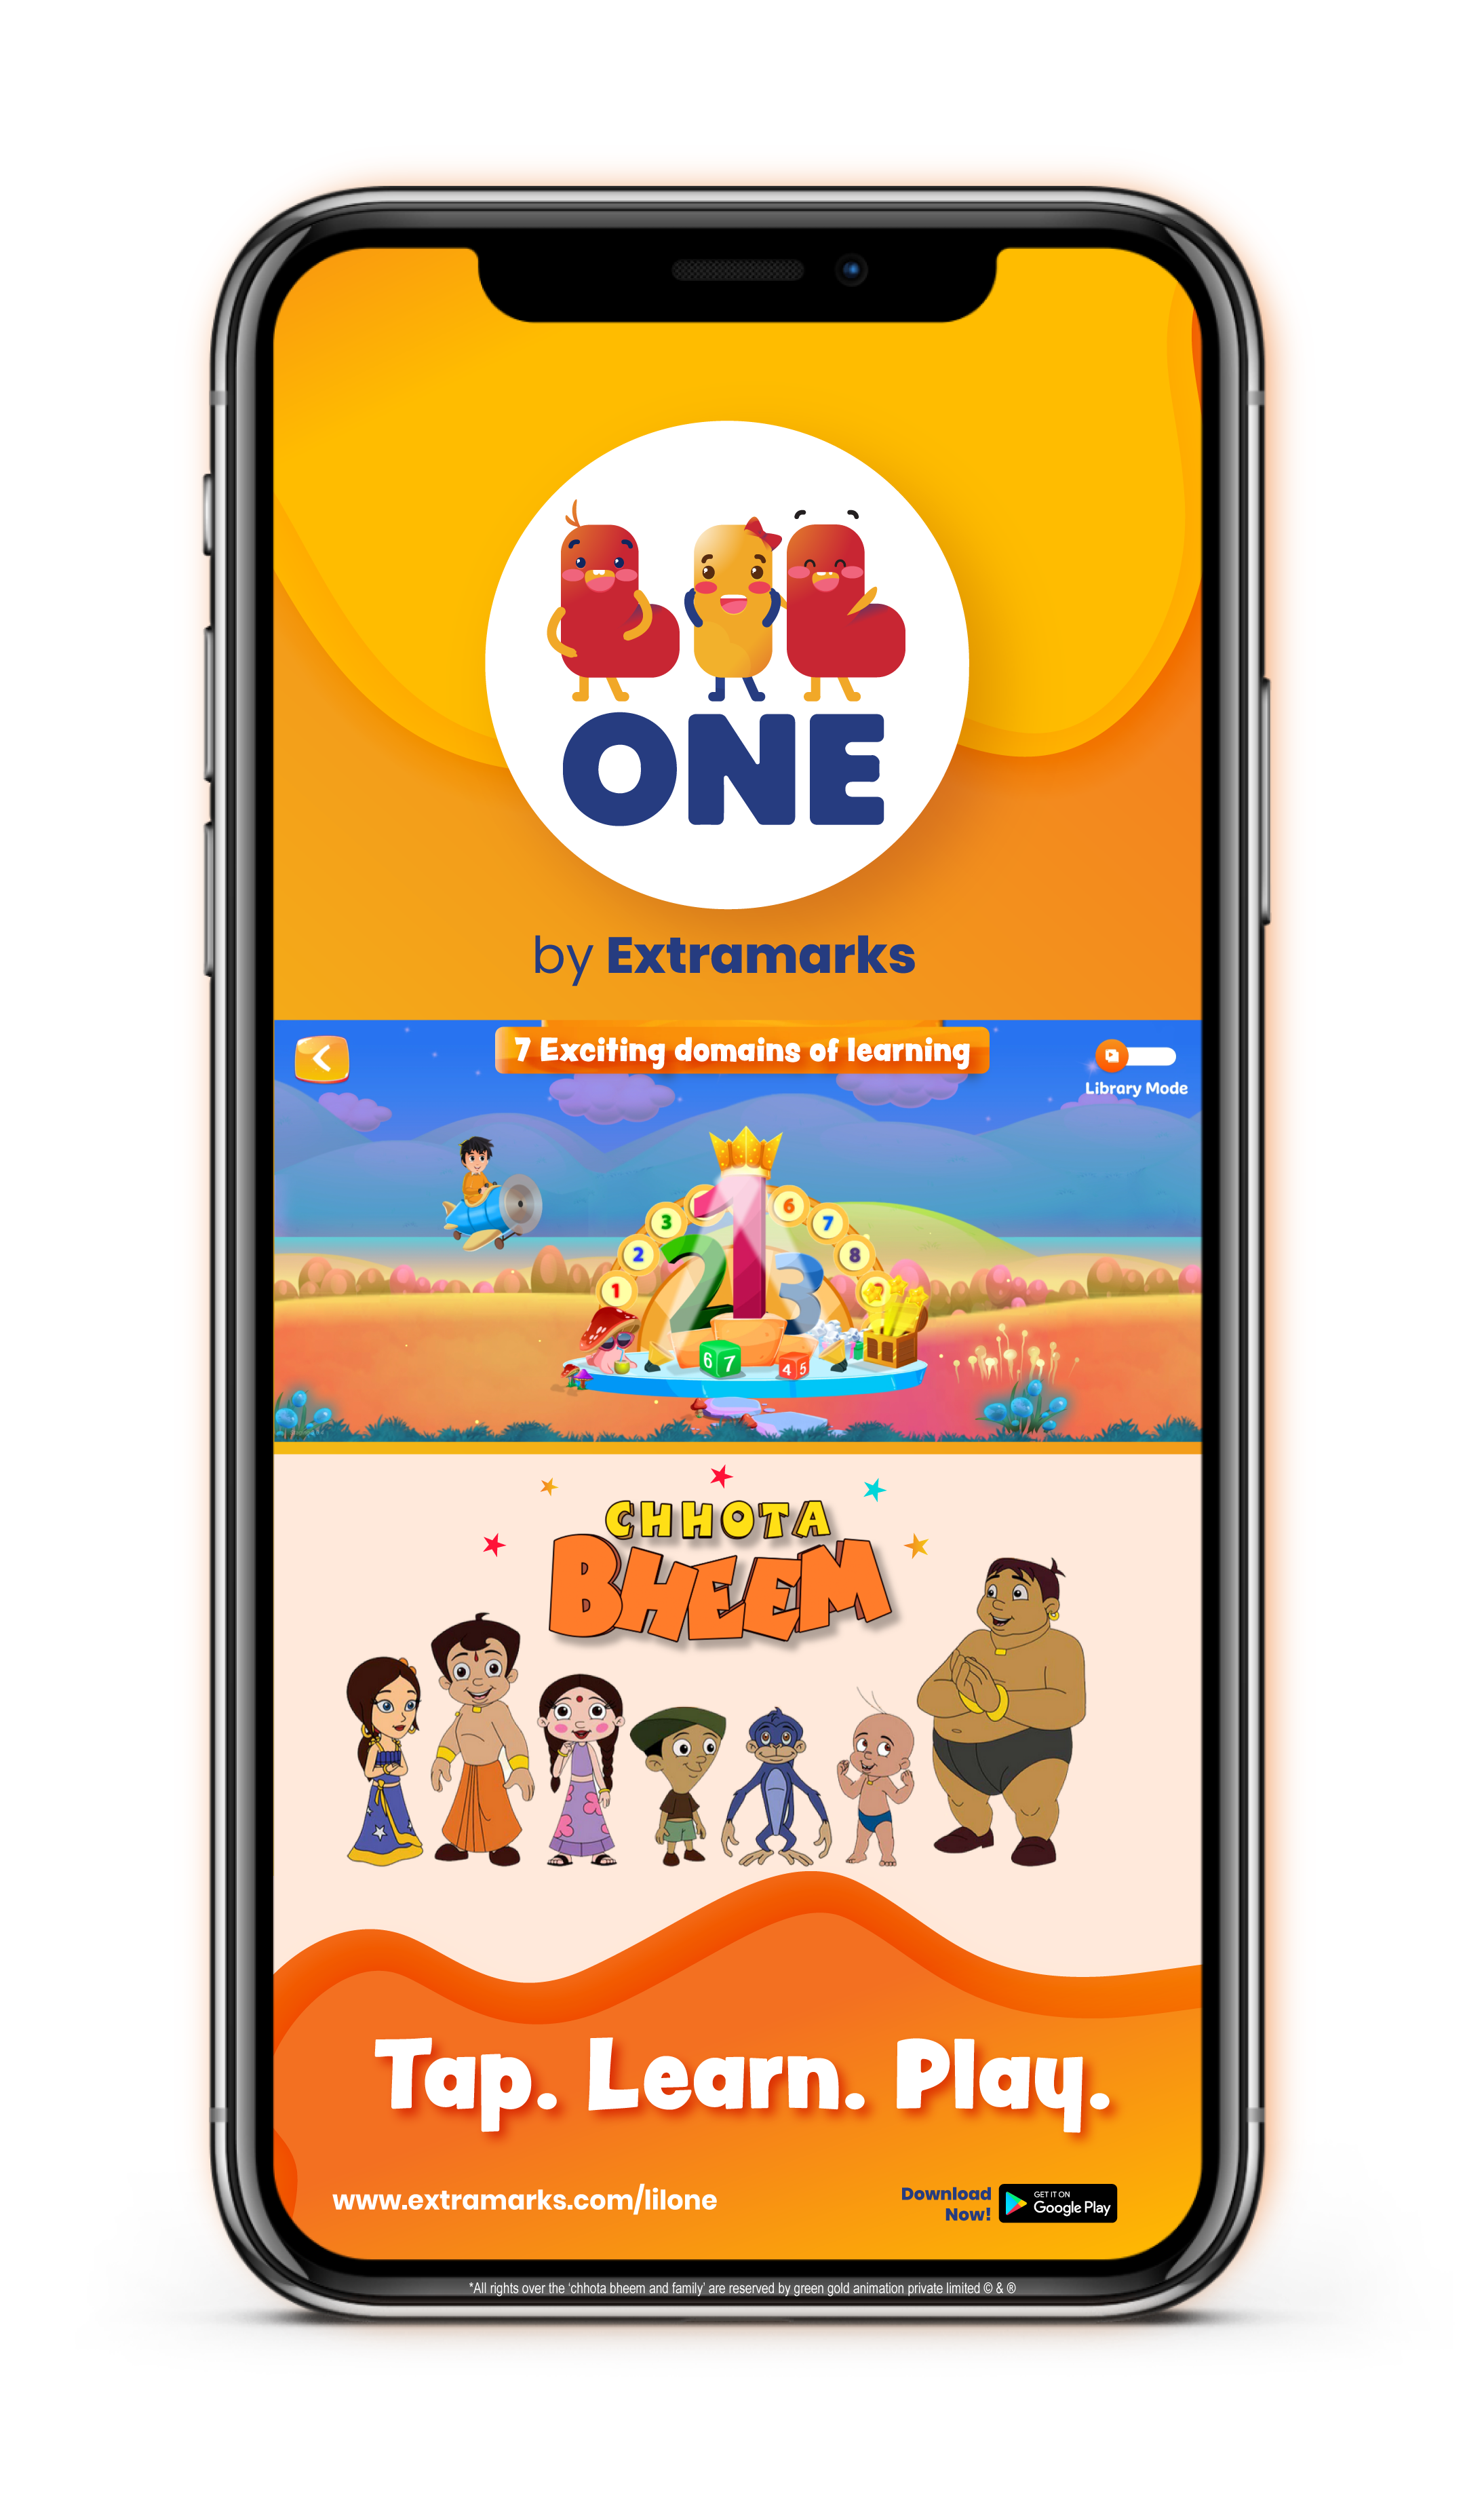 Extramarks Education adds another feather to its cap; launches new app Lil One by Extramarks for early childhood learning